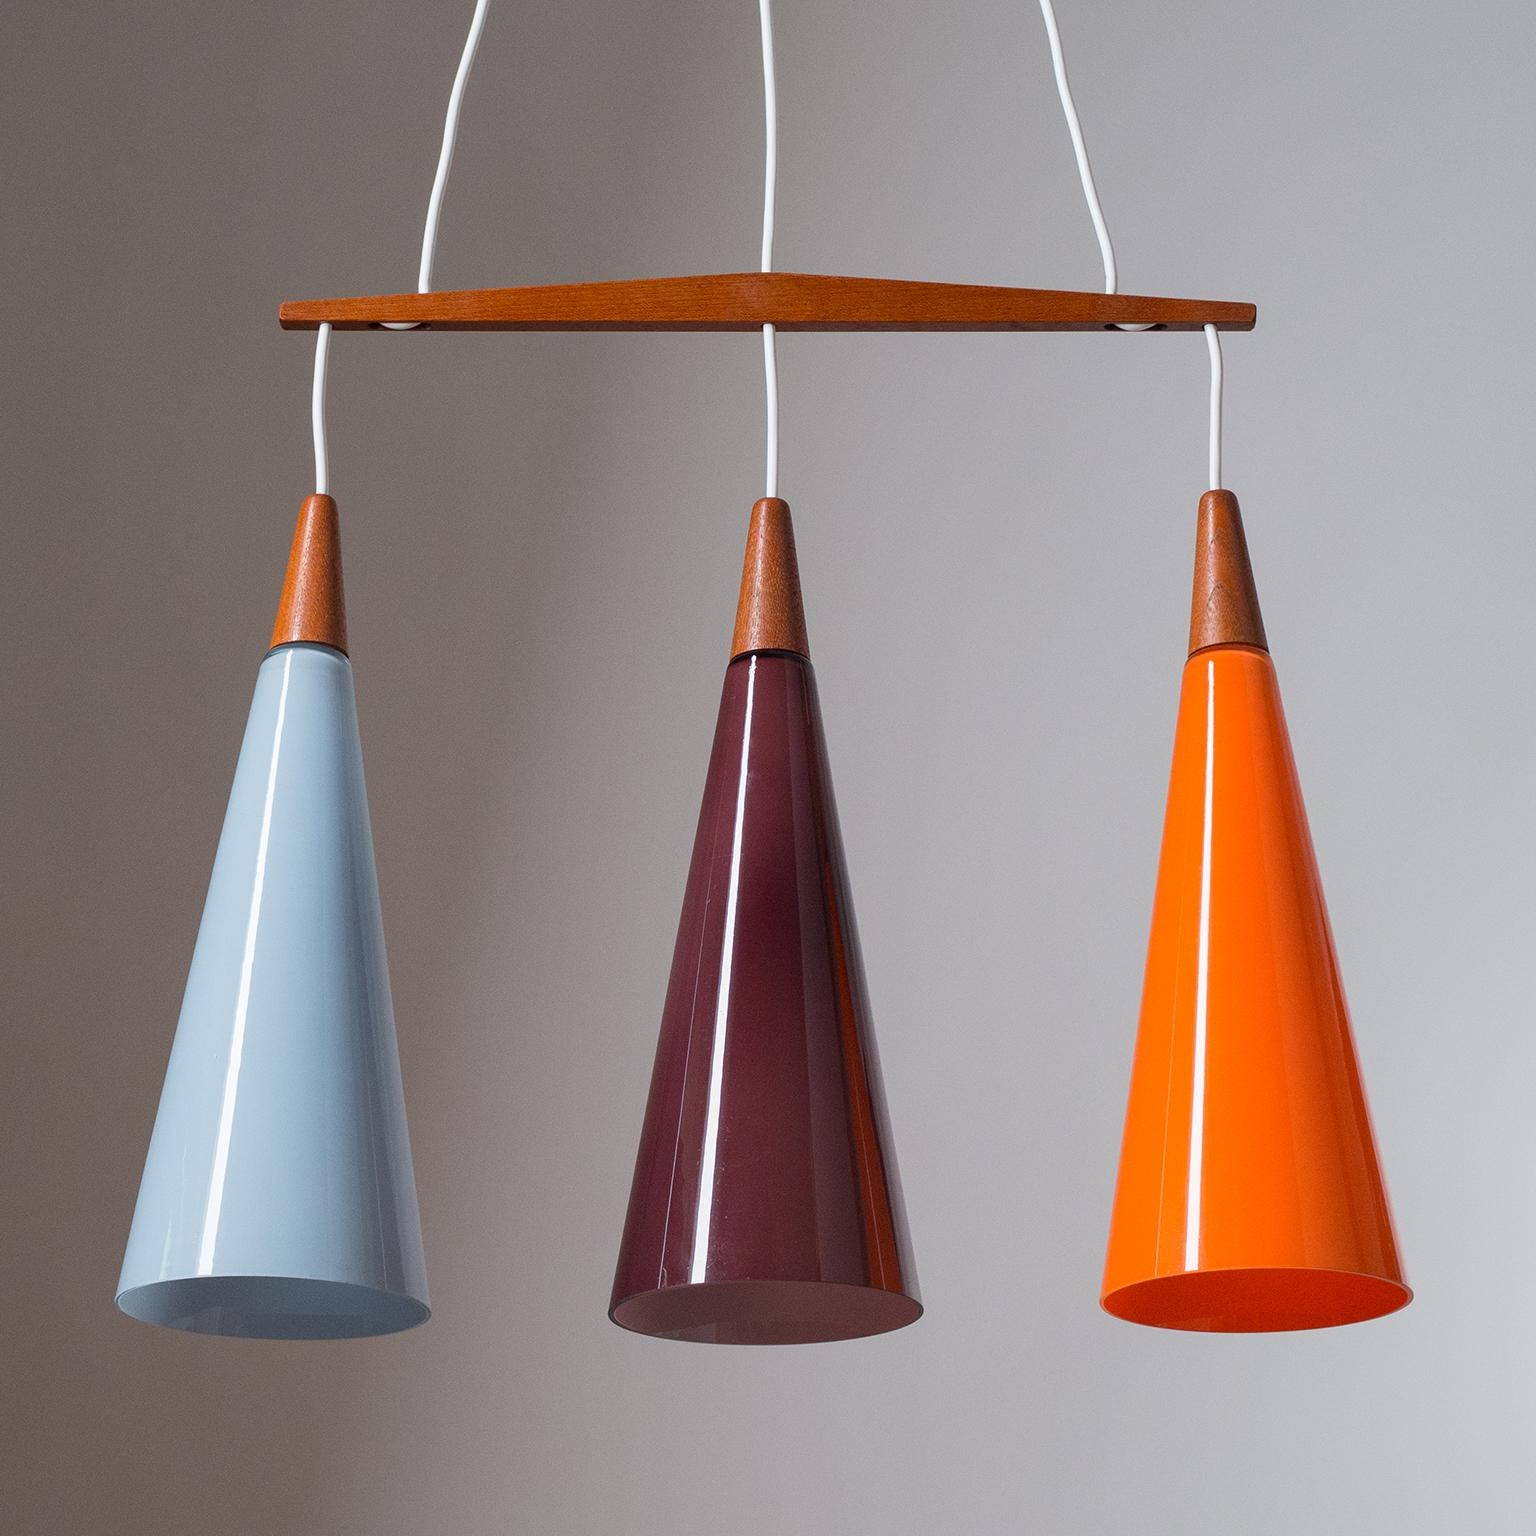 Mid-20th Century Danish Suspension Chandelier, 1960s, Colored Glass and Teak